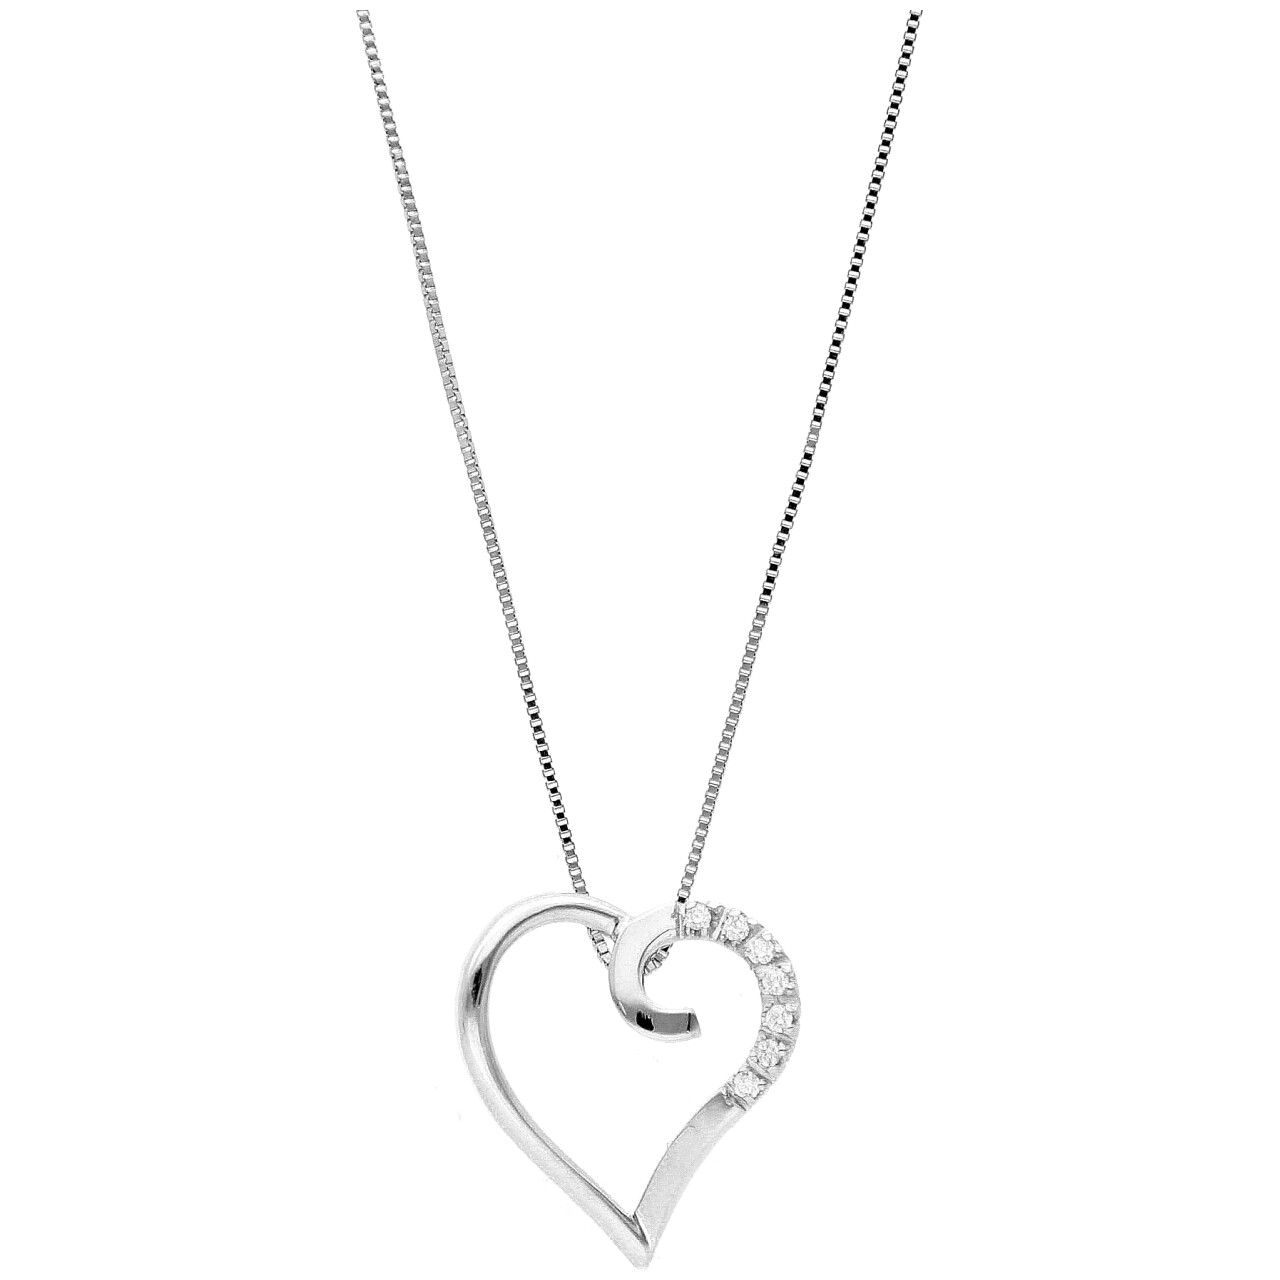 White gold necklace with heart pendant with 0.14 ct. diamonds